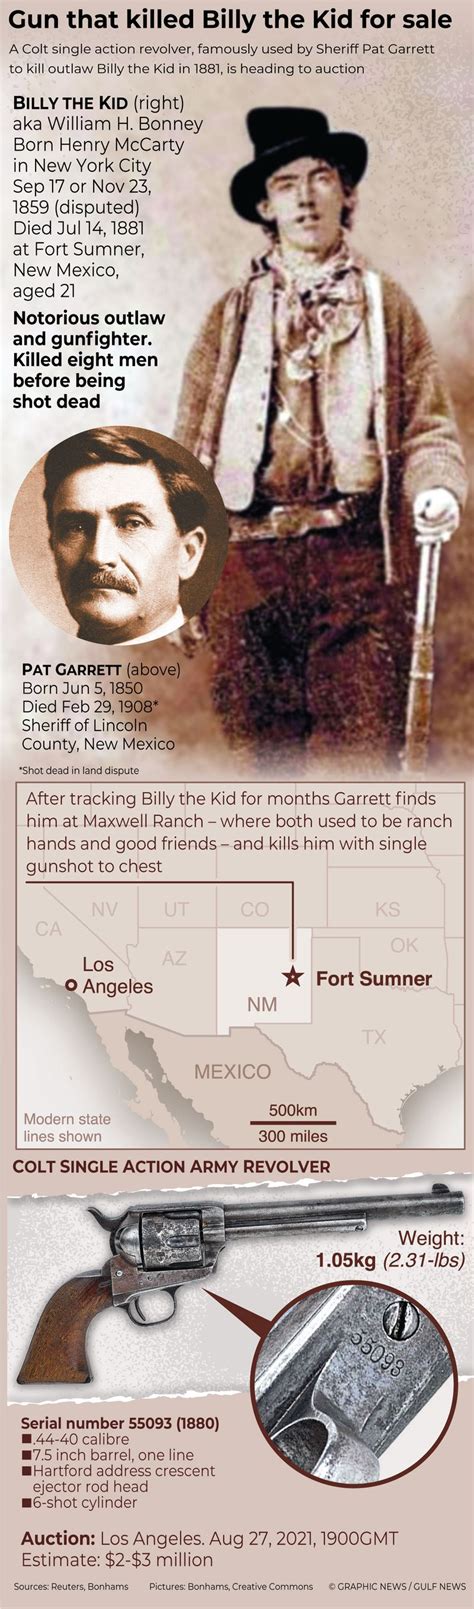 Today in History: July 14, Billy the Kid shot and killed by Pat Garrett